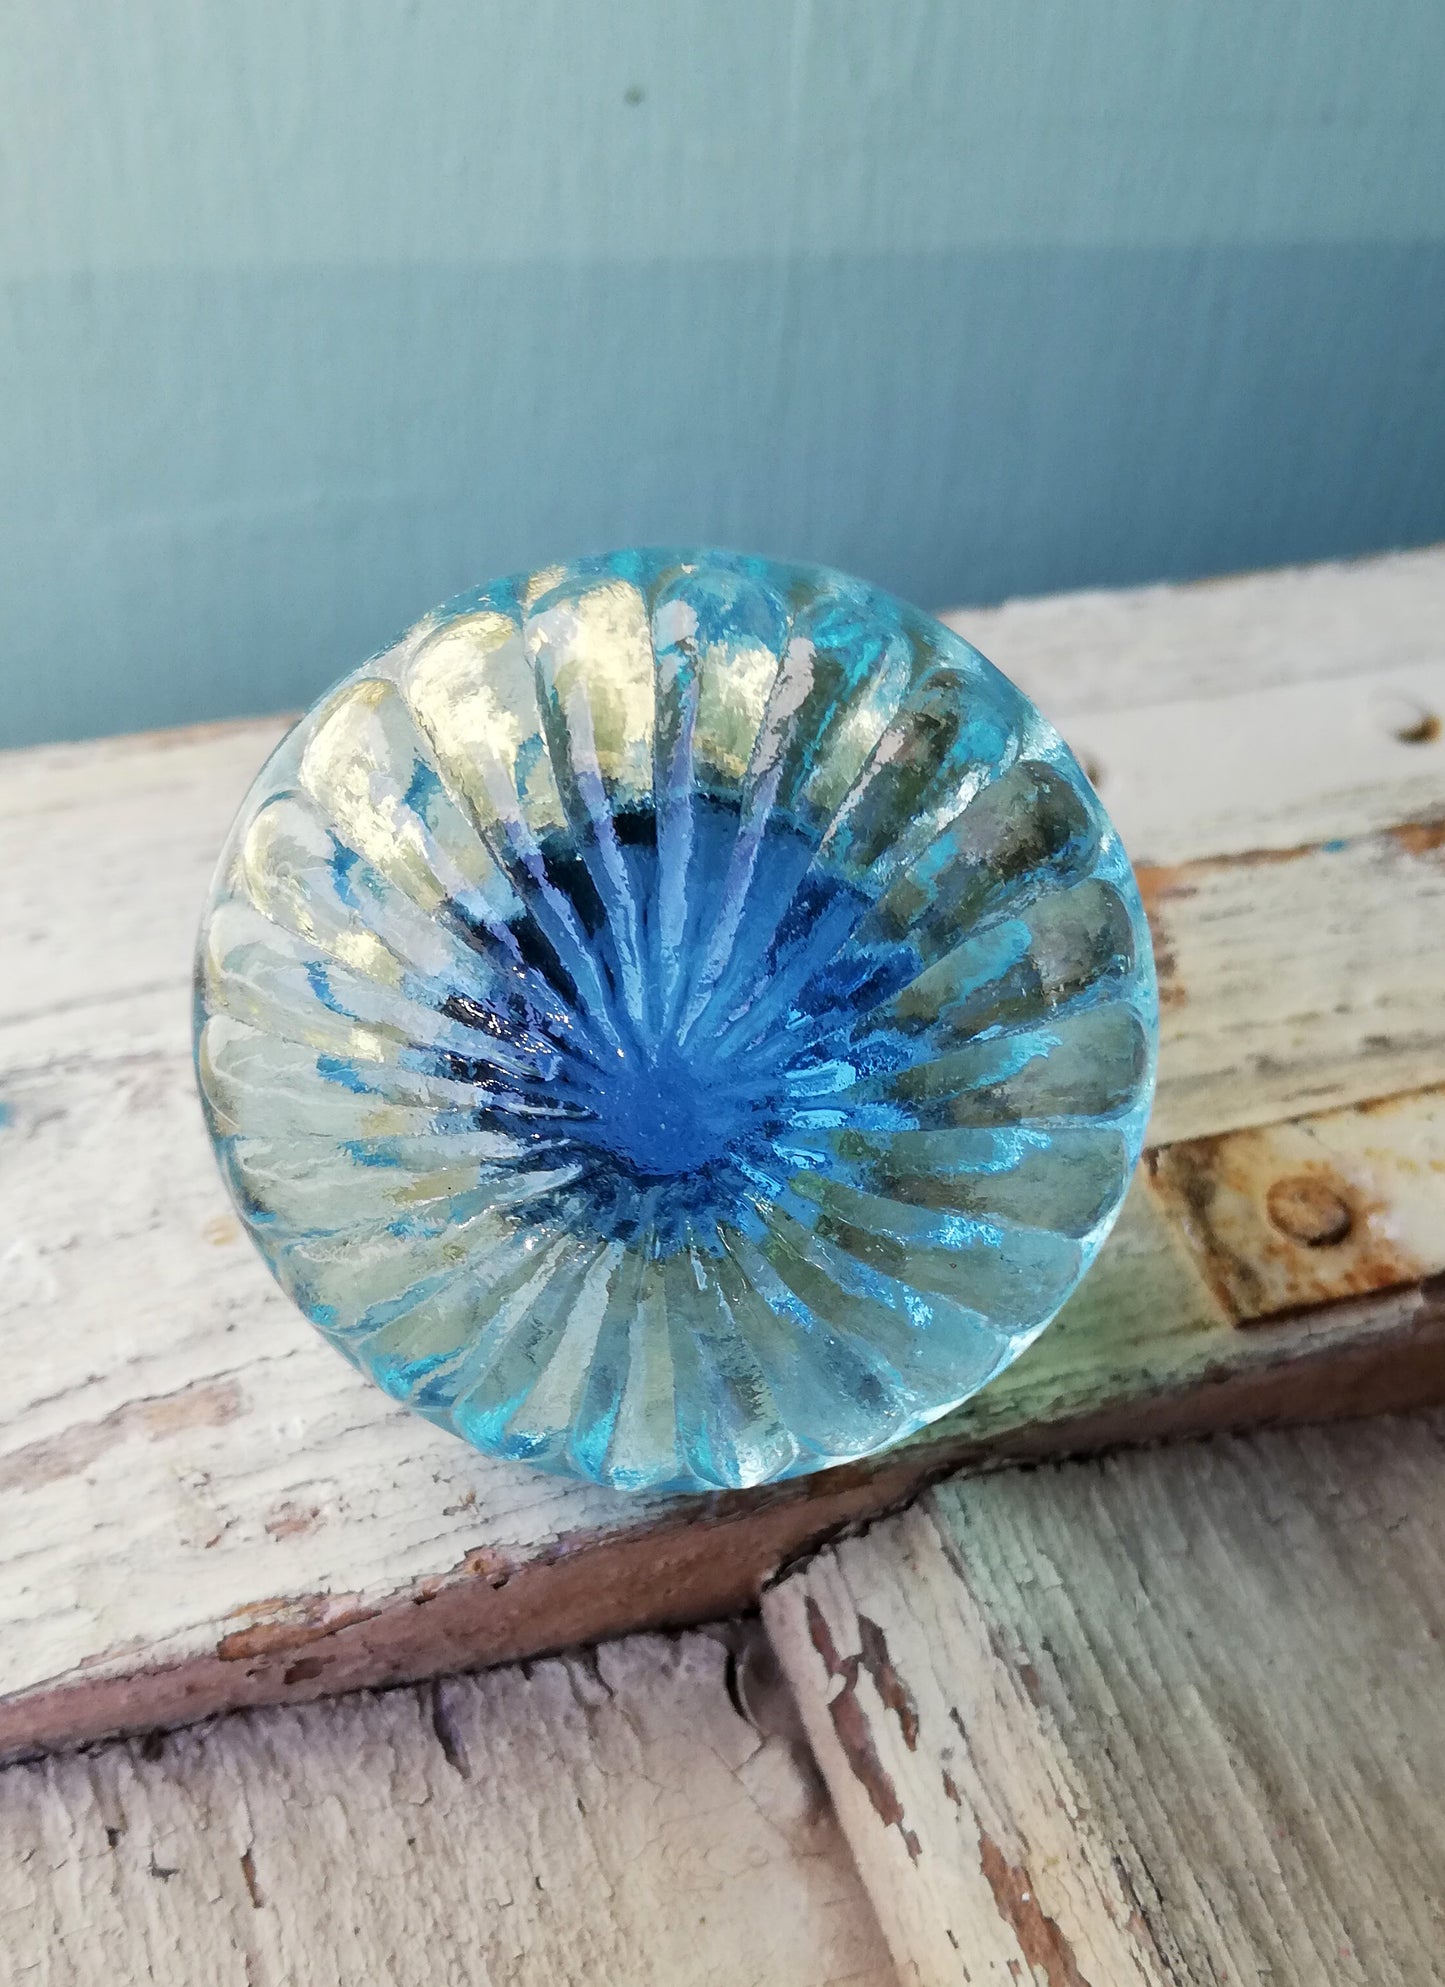 Antique style glass drawer knobs